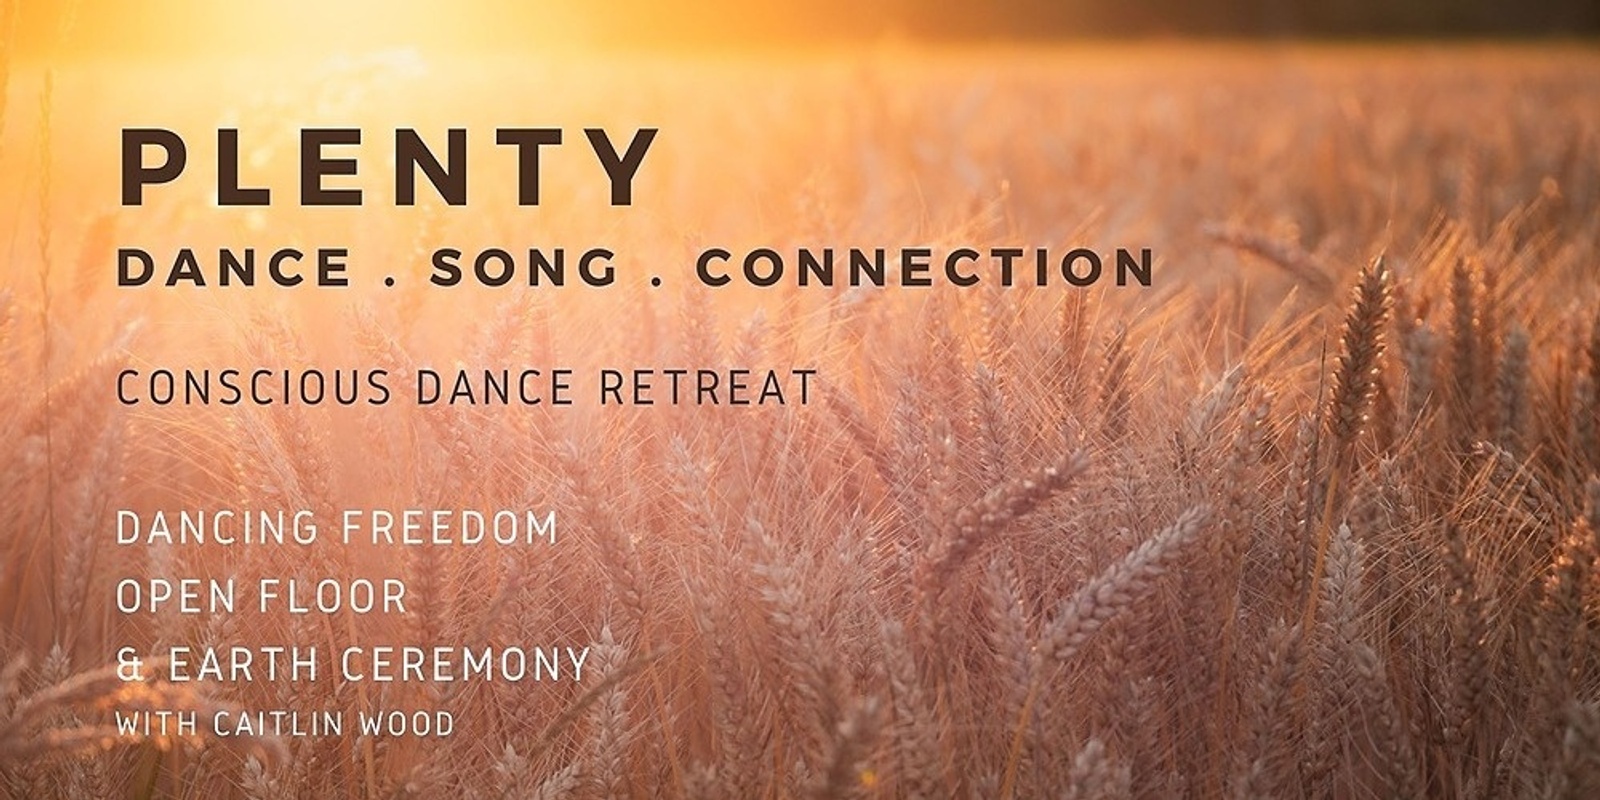 Banner image for PLENTY - dance . song . connection - conscious dance retreat with Caitlin